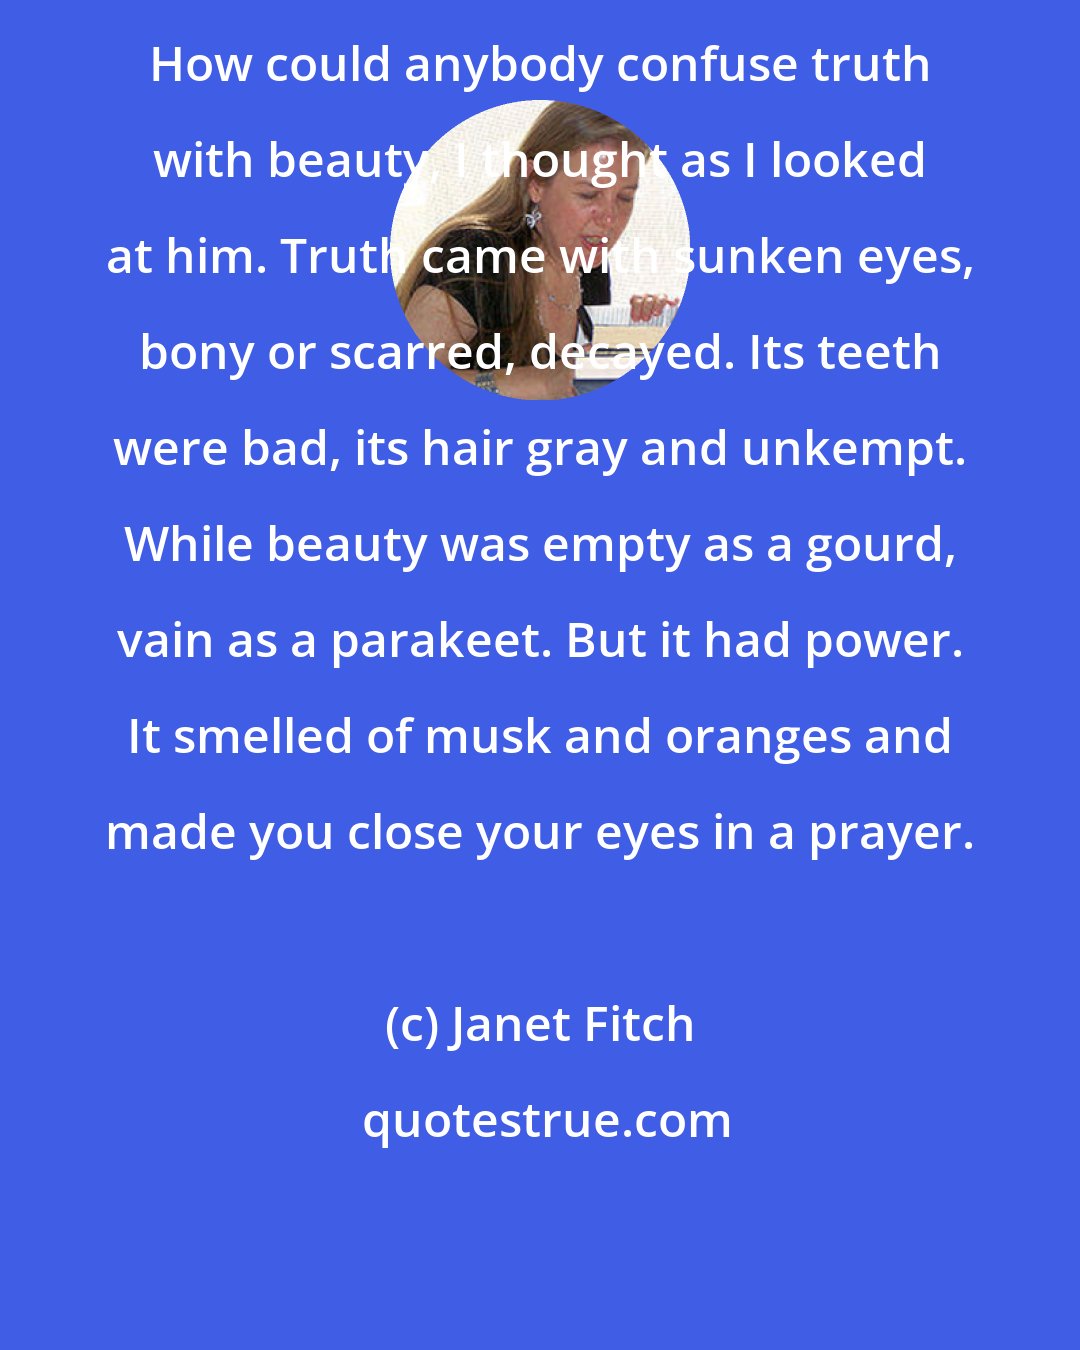 Janet Fitch: How could anybody confuse truth with beauty, I thought as I looked at him. Truth came with sunken eyes, bony or scarred, decayed. Its teeth were bad, its hair gray and unkempt. While beauty was empty as a gourd, vain as a parakeet. But it had power. It smelled of musk and oranges and made you close your eyes in a prayer.